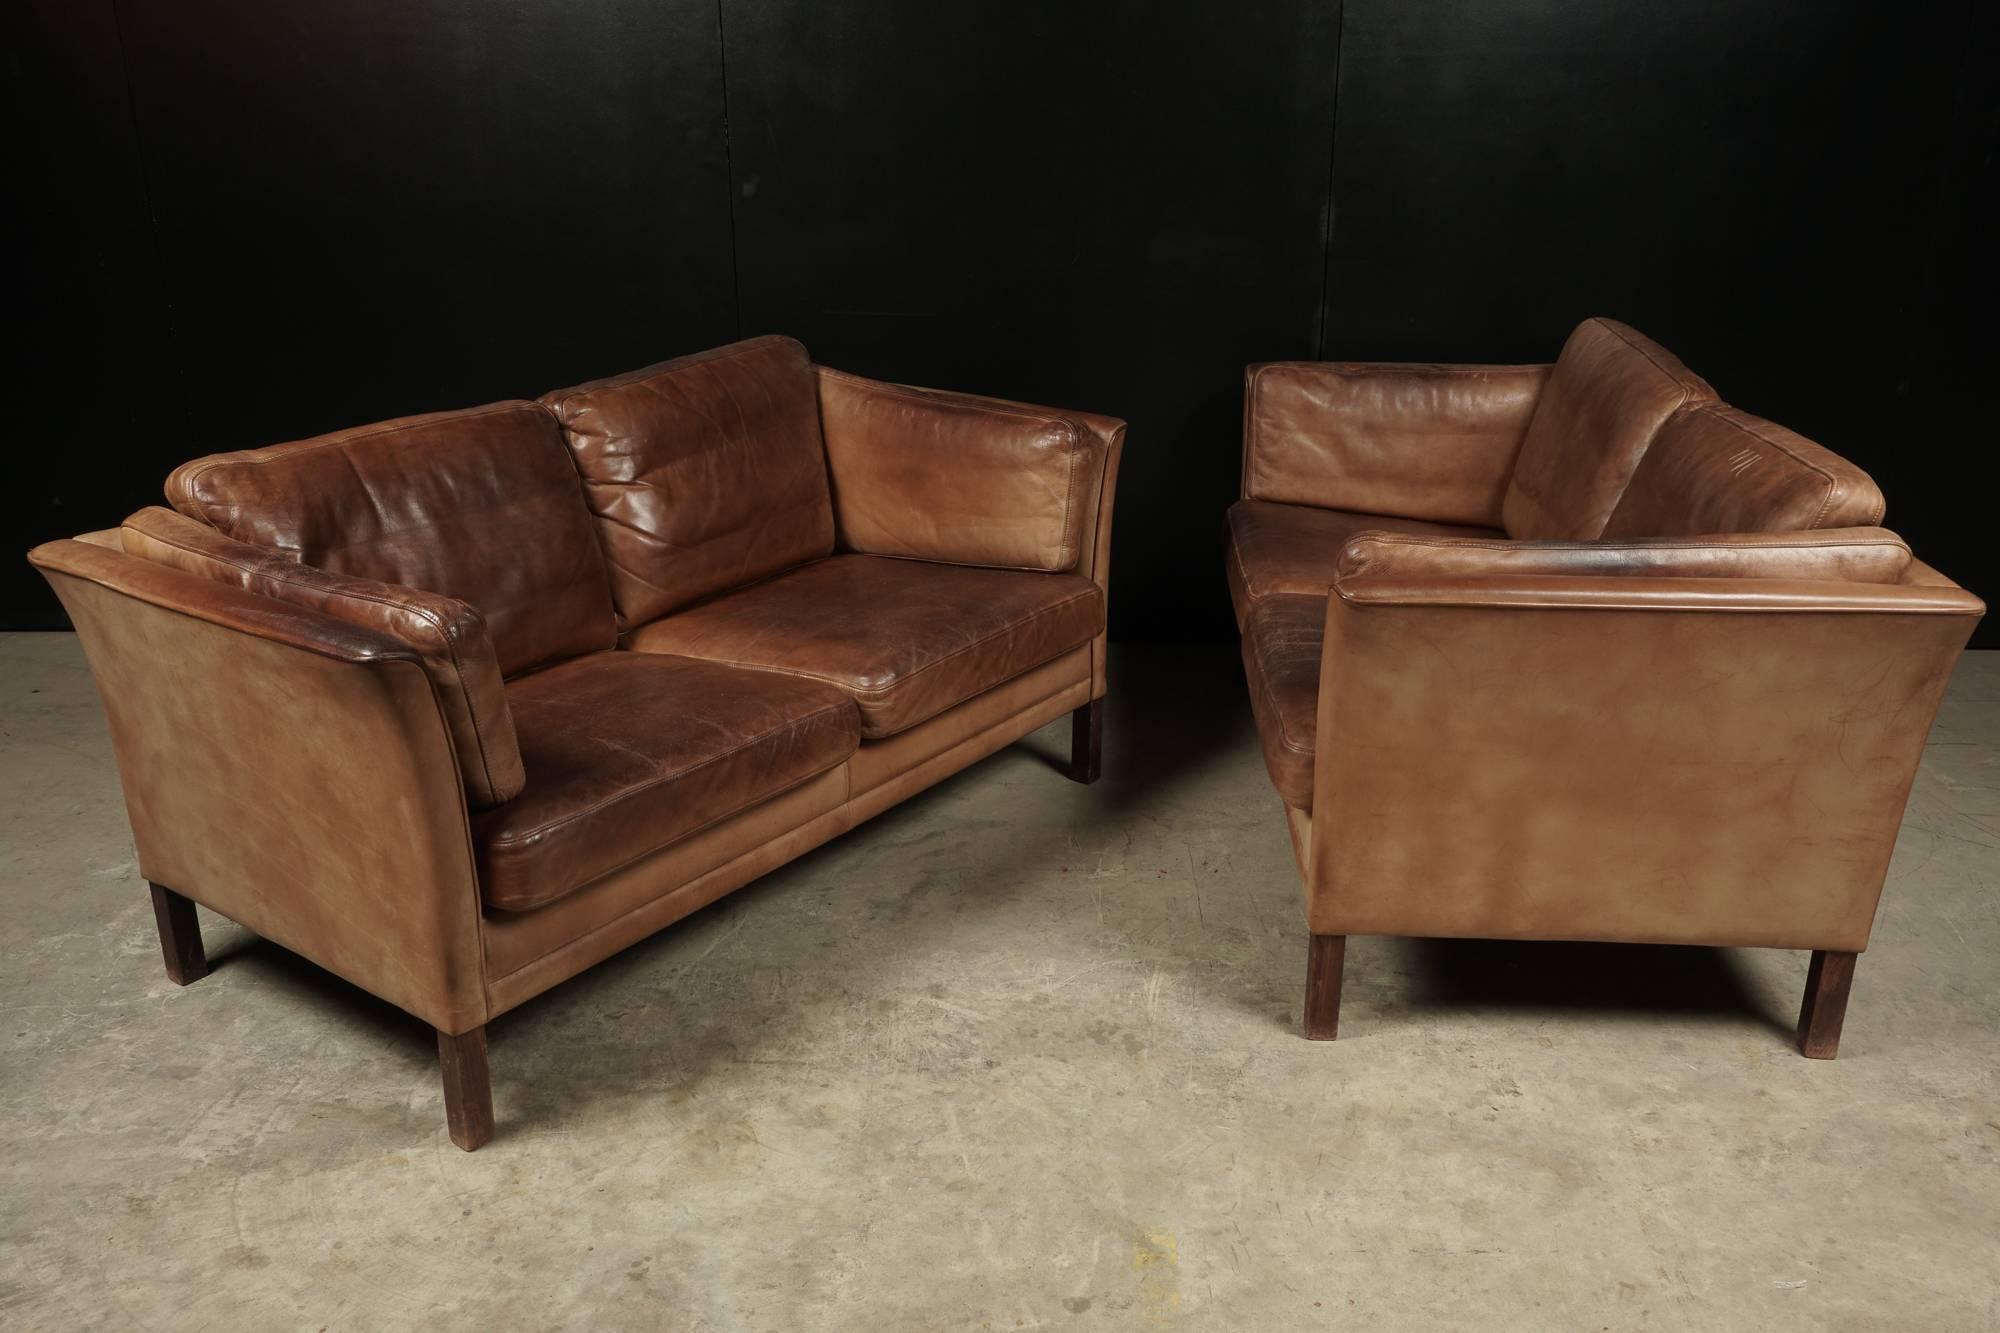 Pair of Two-Seater Leather Sofas From Denmark, Circa 1970.  Original brown leather  with patina.